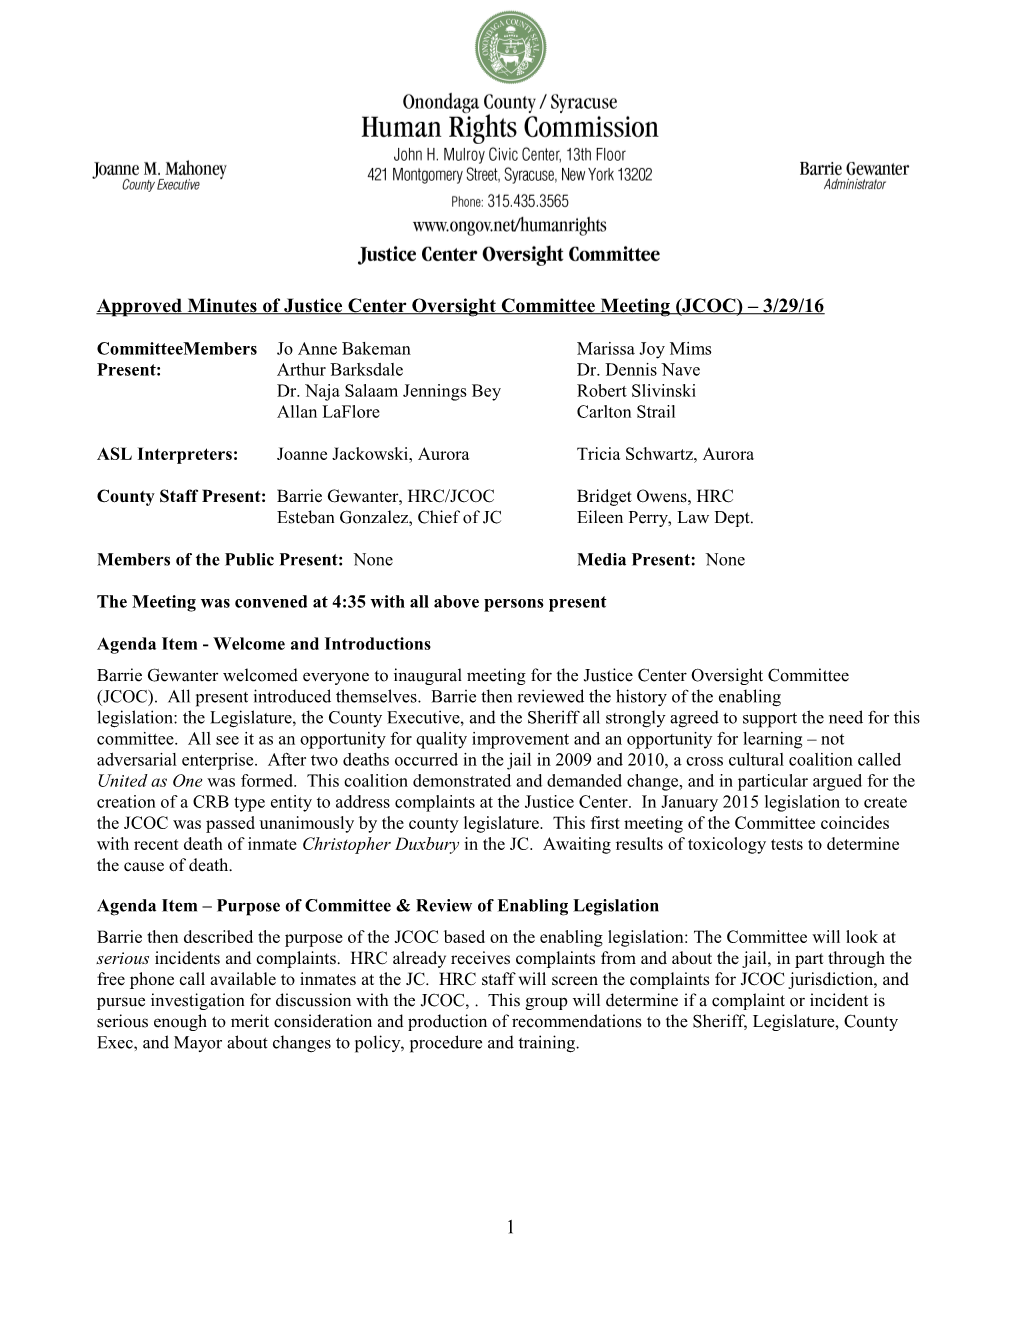 Approved Minutes of Justice Center Oversight Committee Meeting (JCOC) 3/29/16